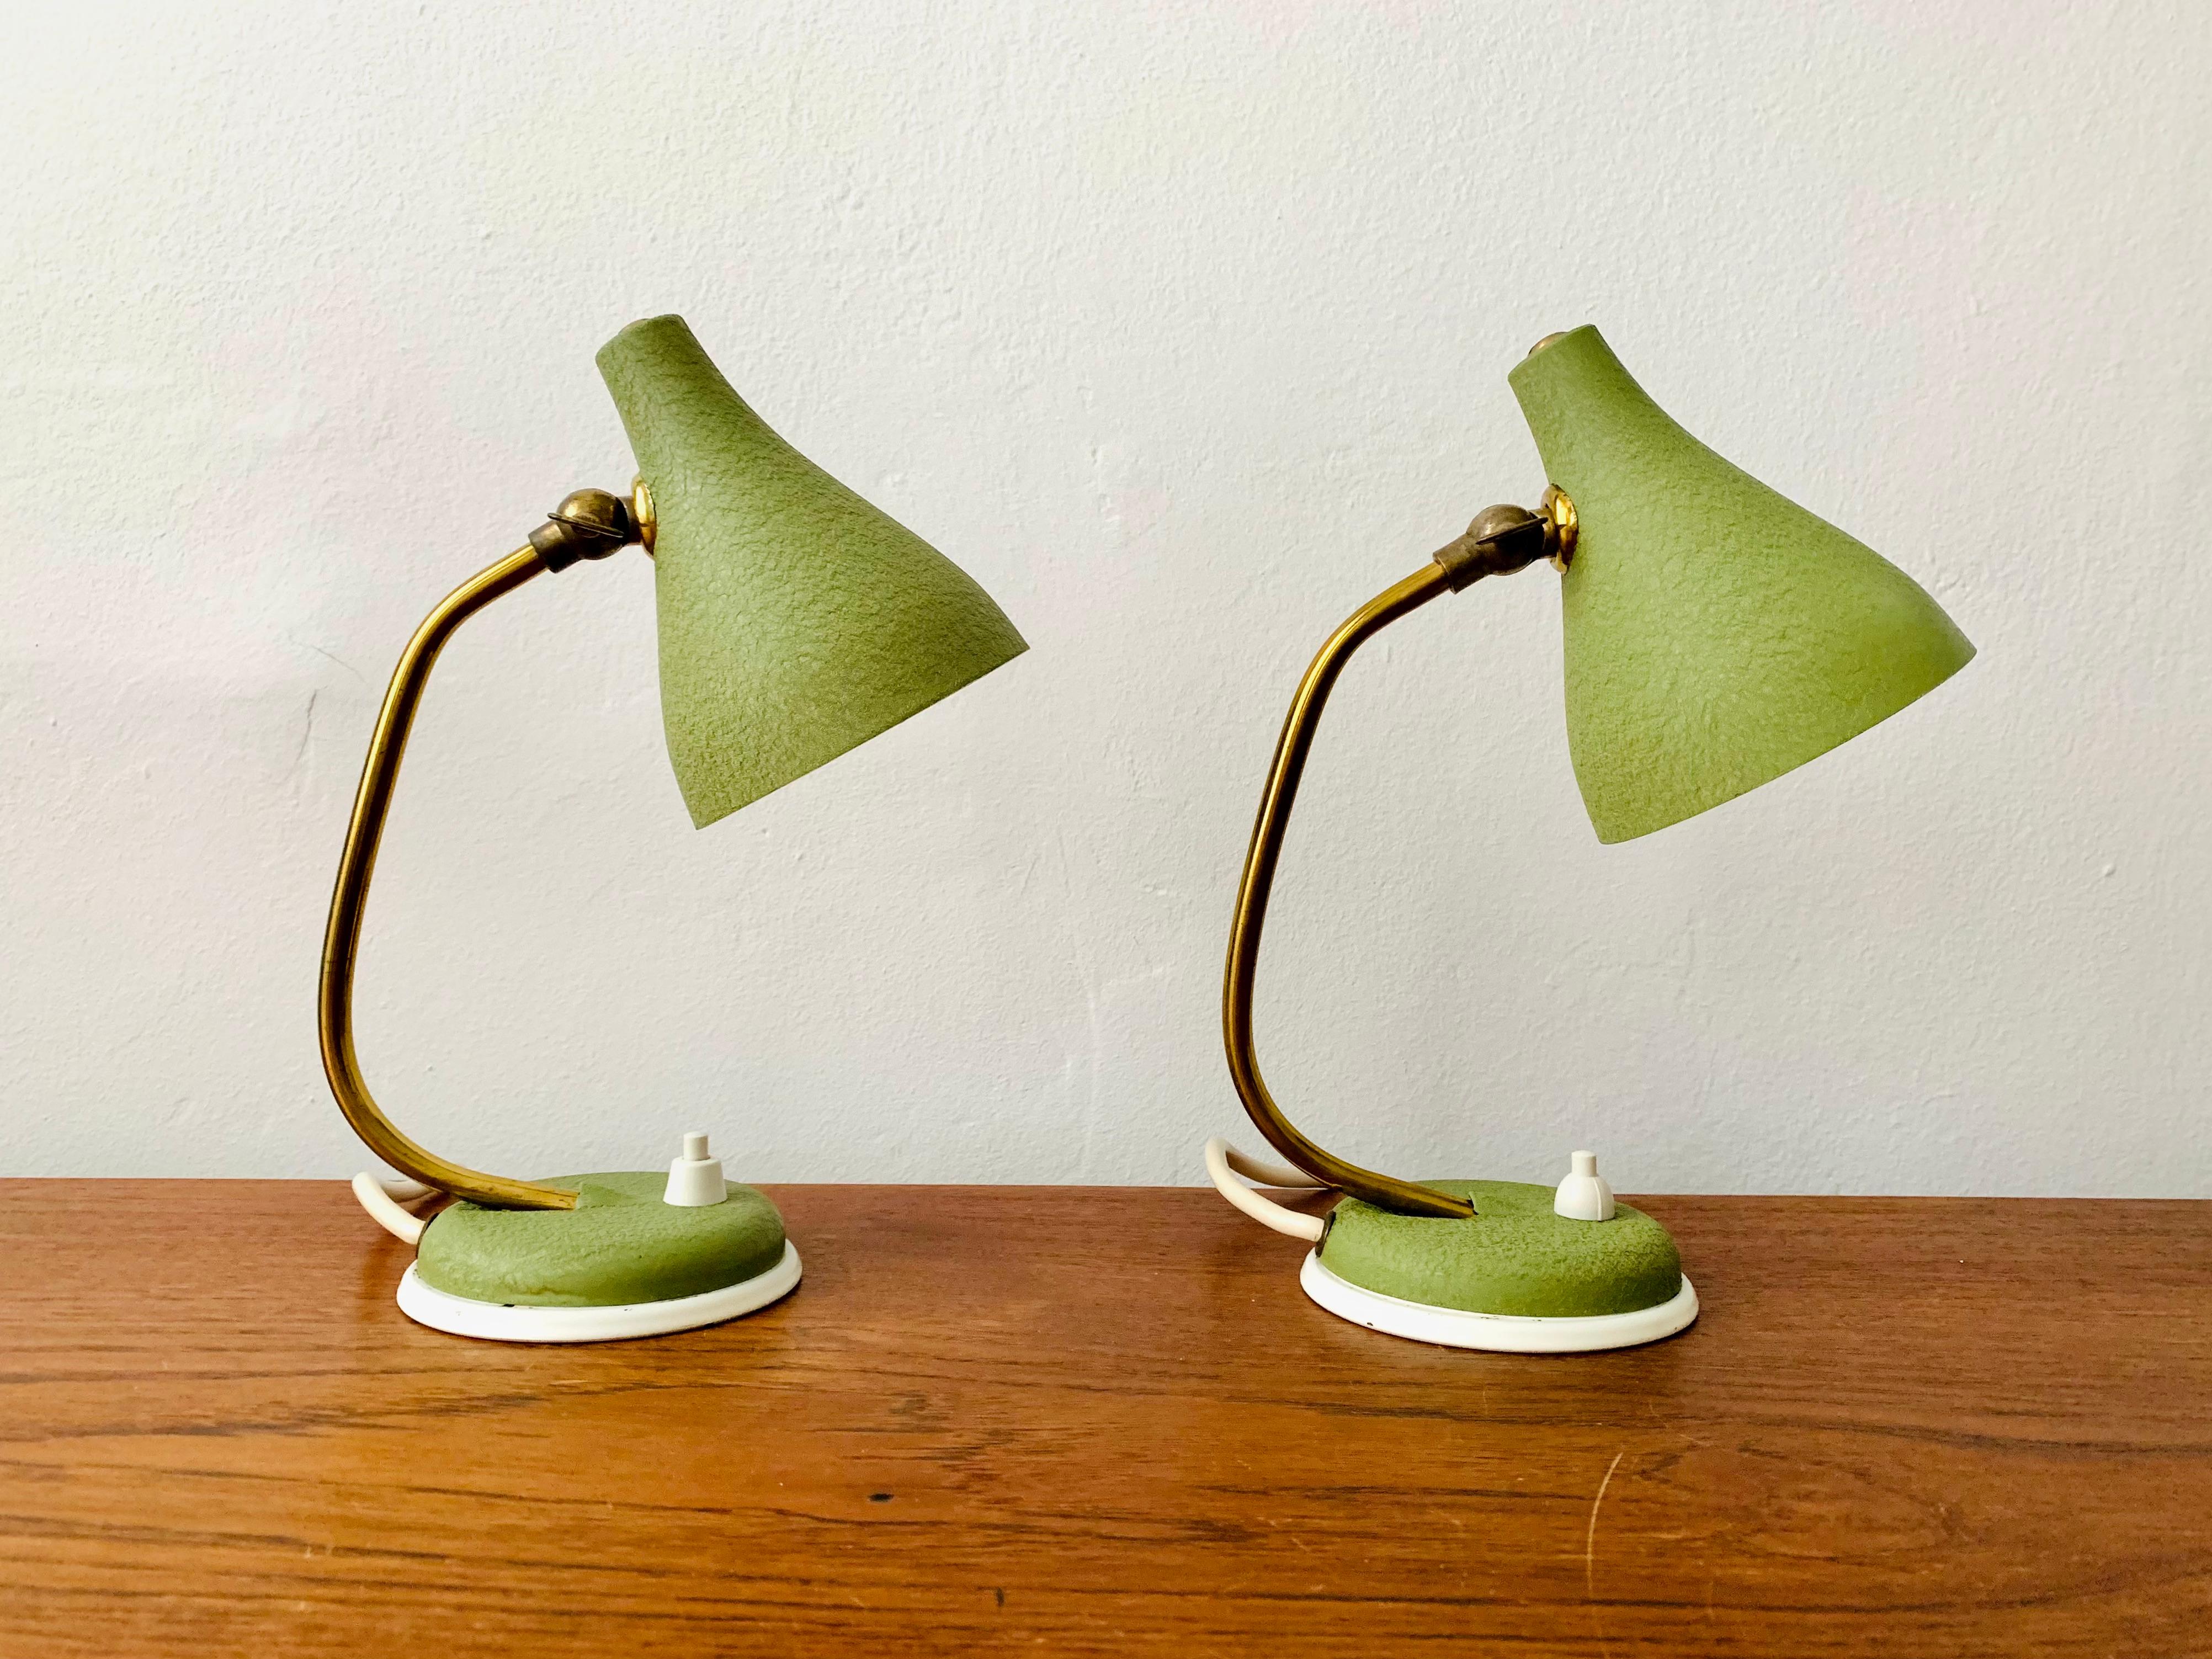 Charming table lamps from the 1950s.
Extremely beautiful design.
An absolute eye-catcher in every home.

Condition:

Very good vintage condition with slight signs of wear consistent with age.
Minimal patina that underlines the charm of the